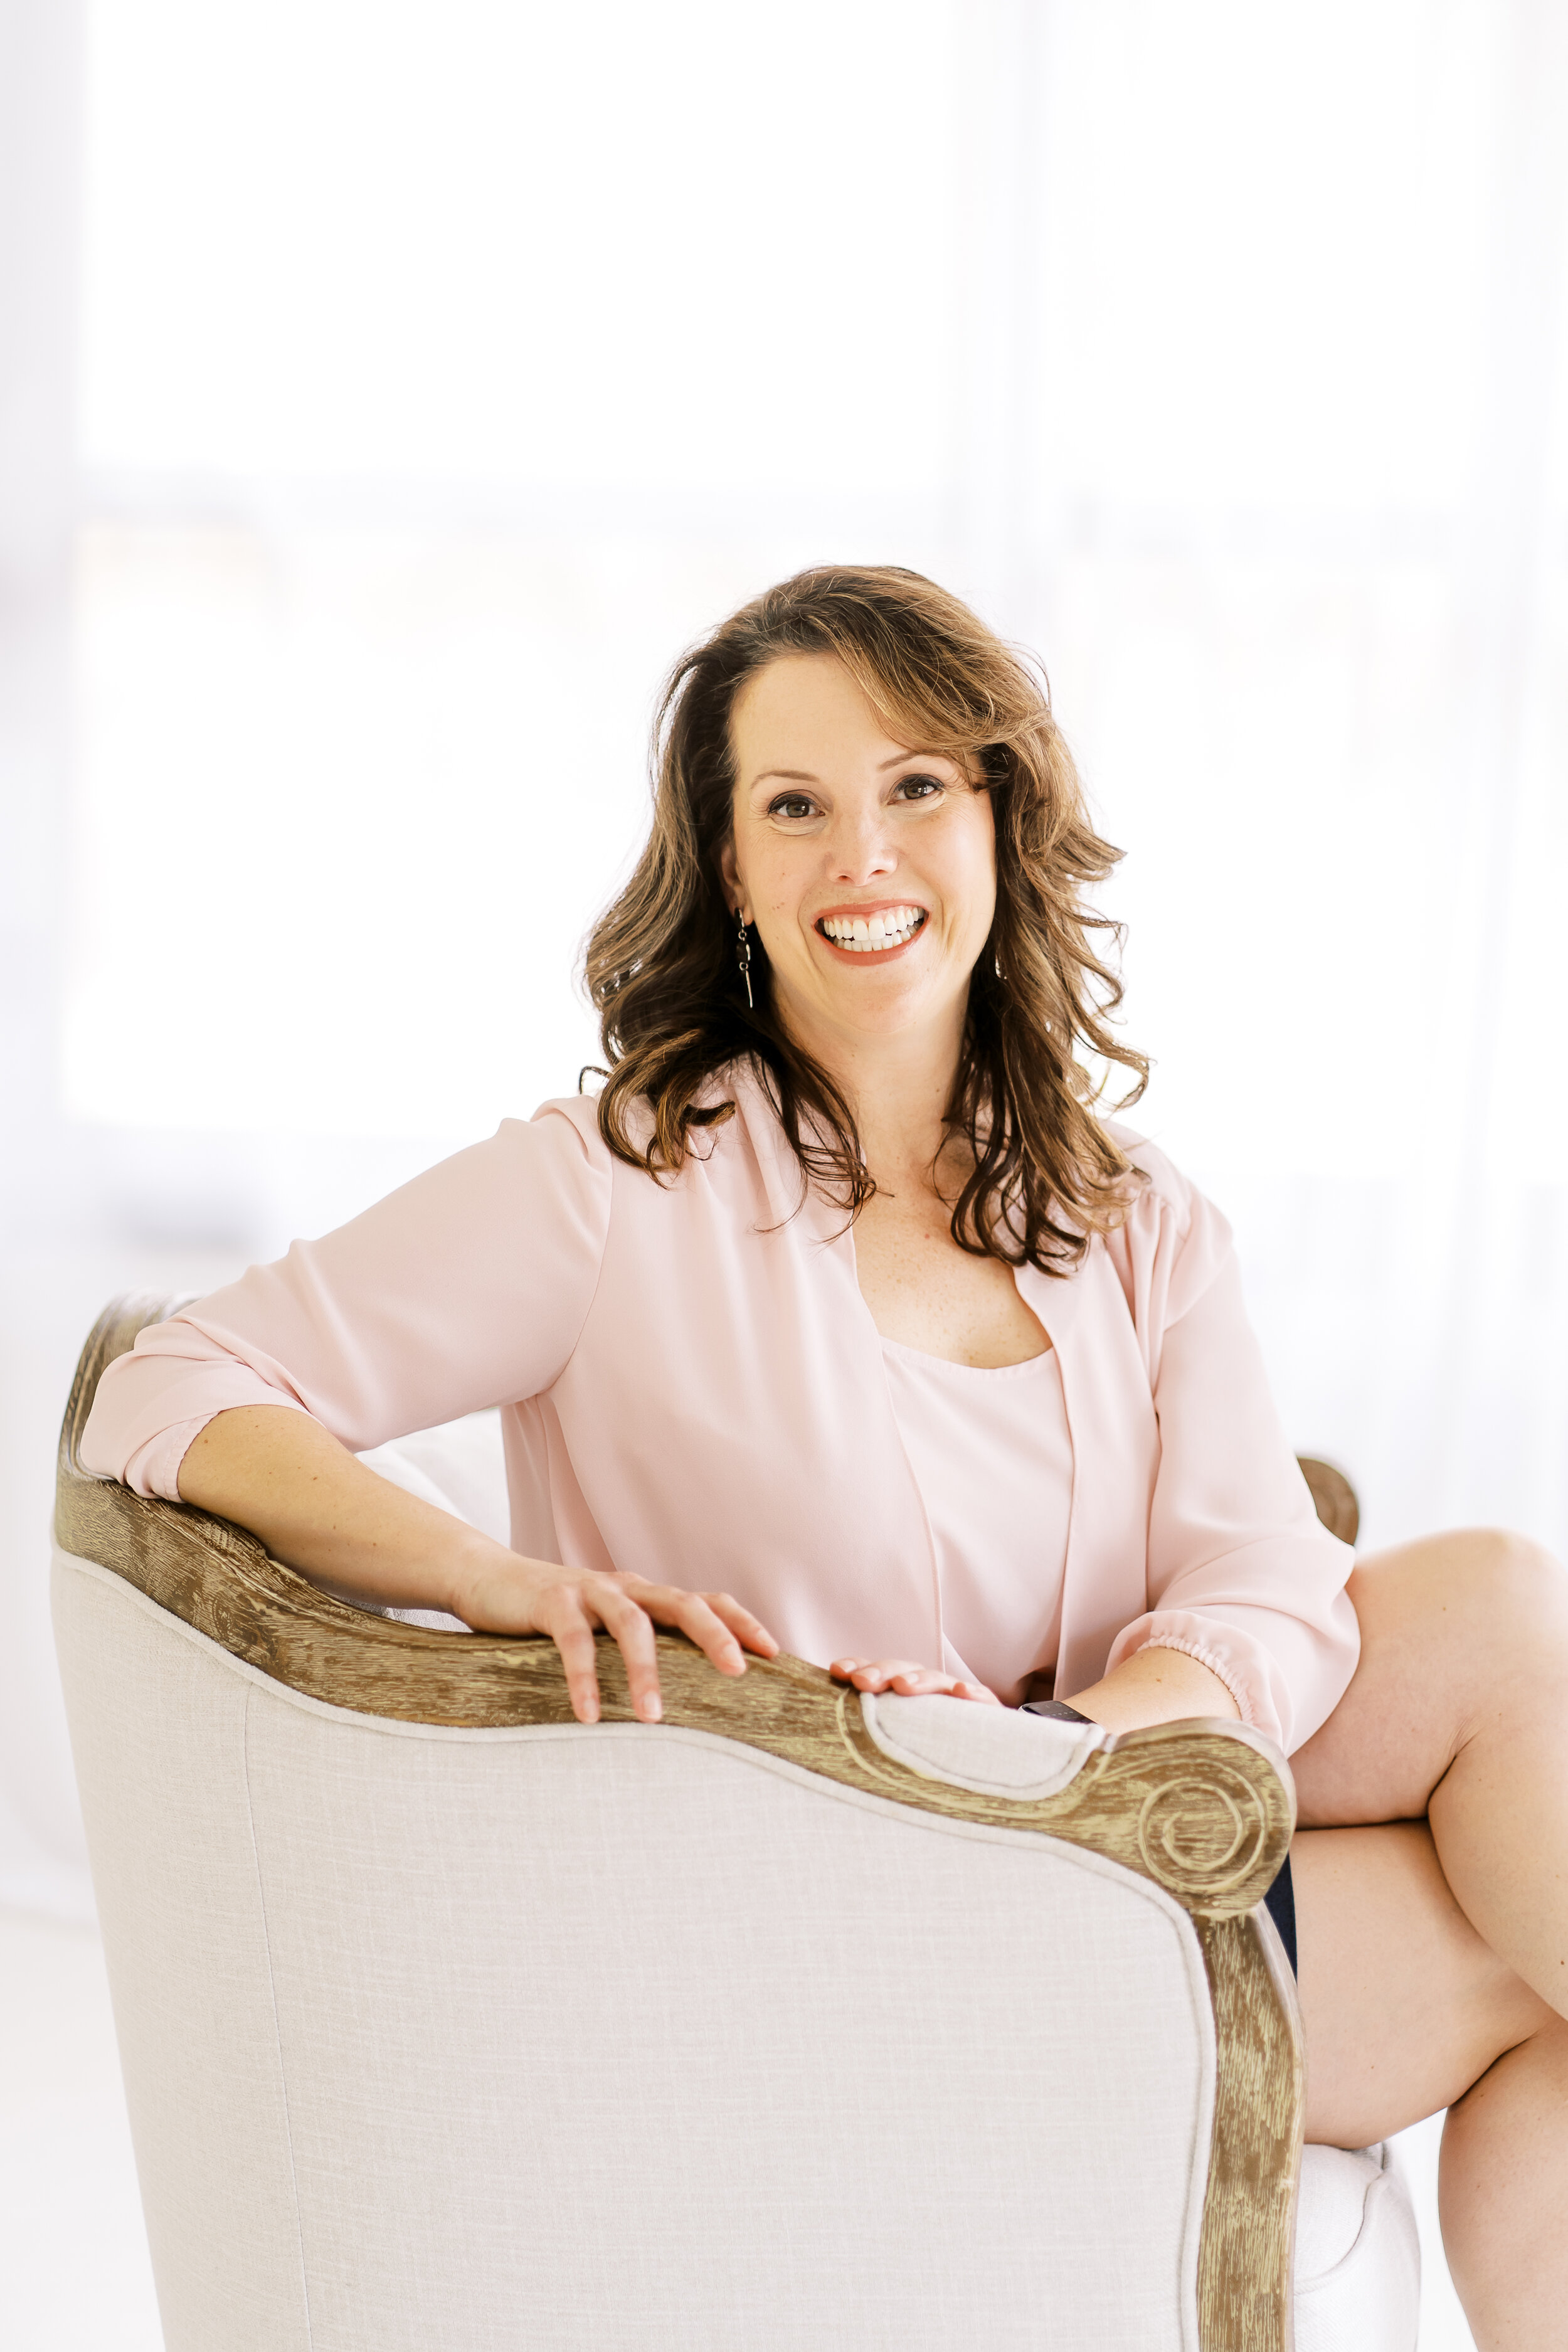 Personal brand photo of life coach sitting on chair in natural light studio in Woodstock, GA